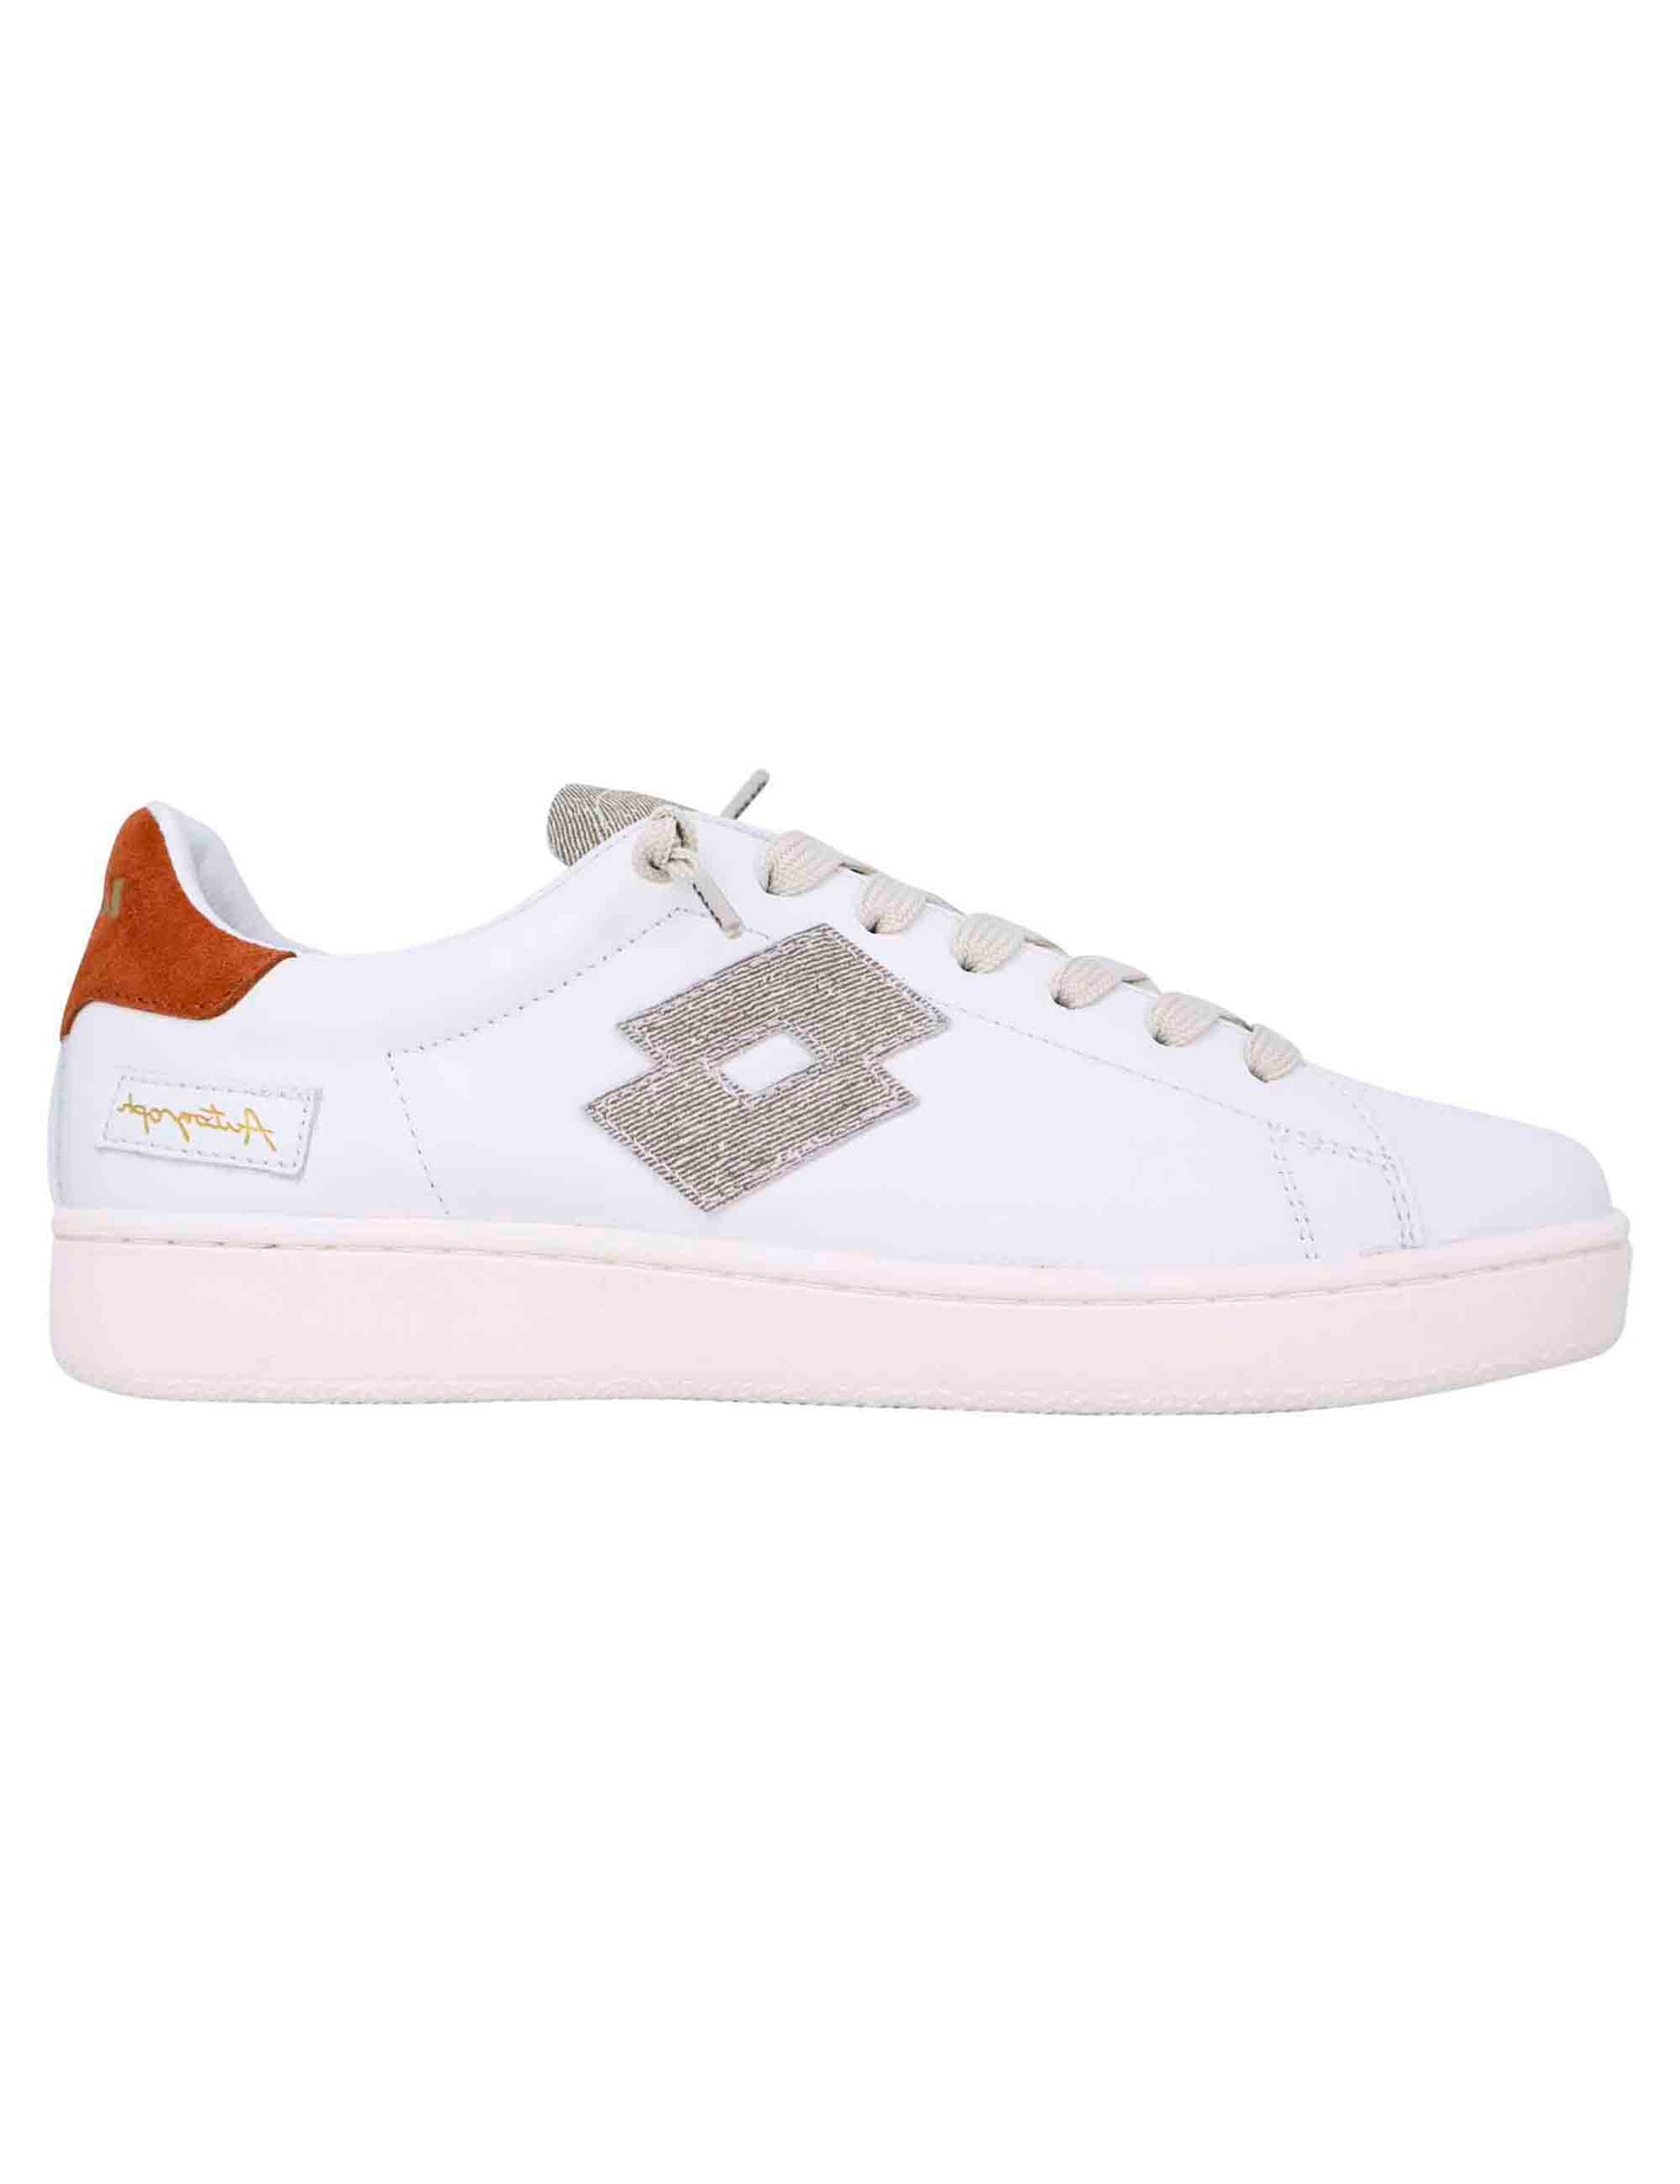 Men's autograph white leather sneakers